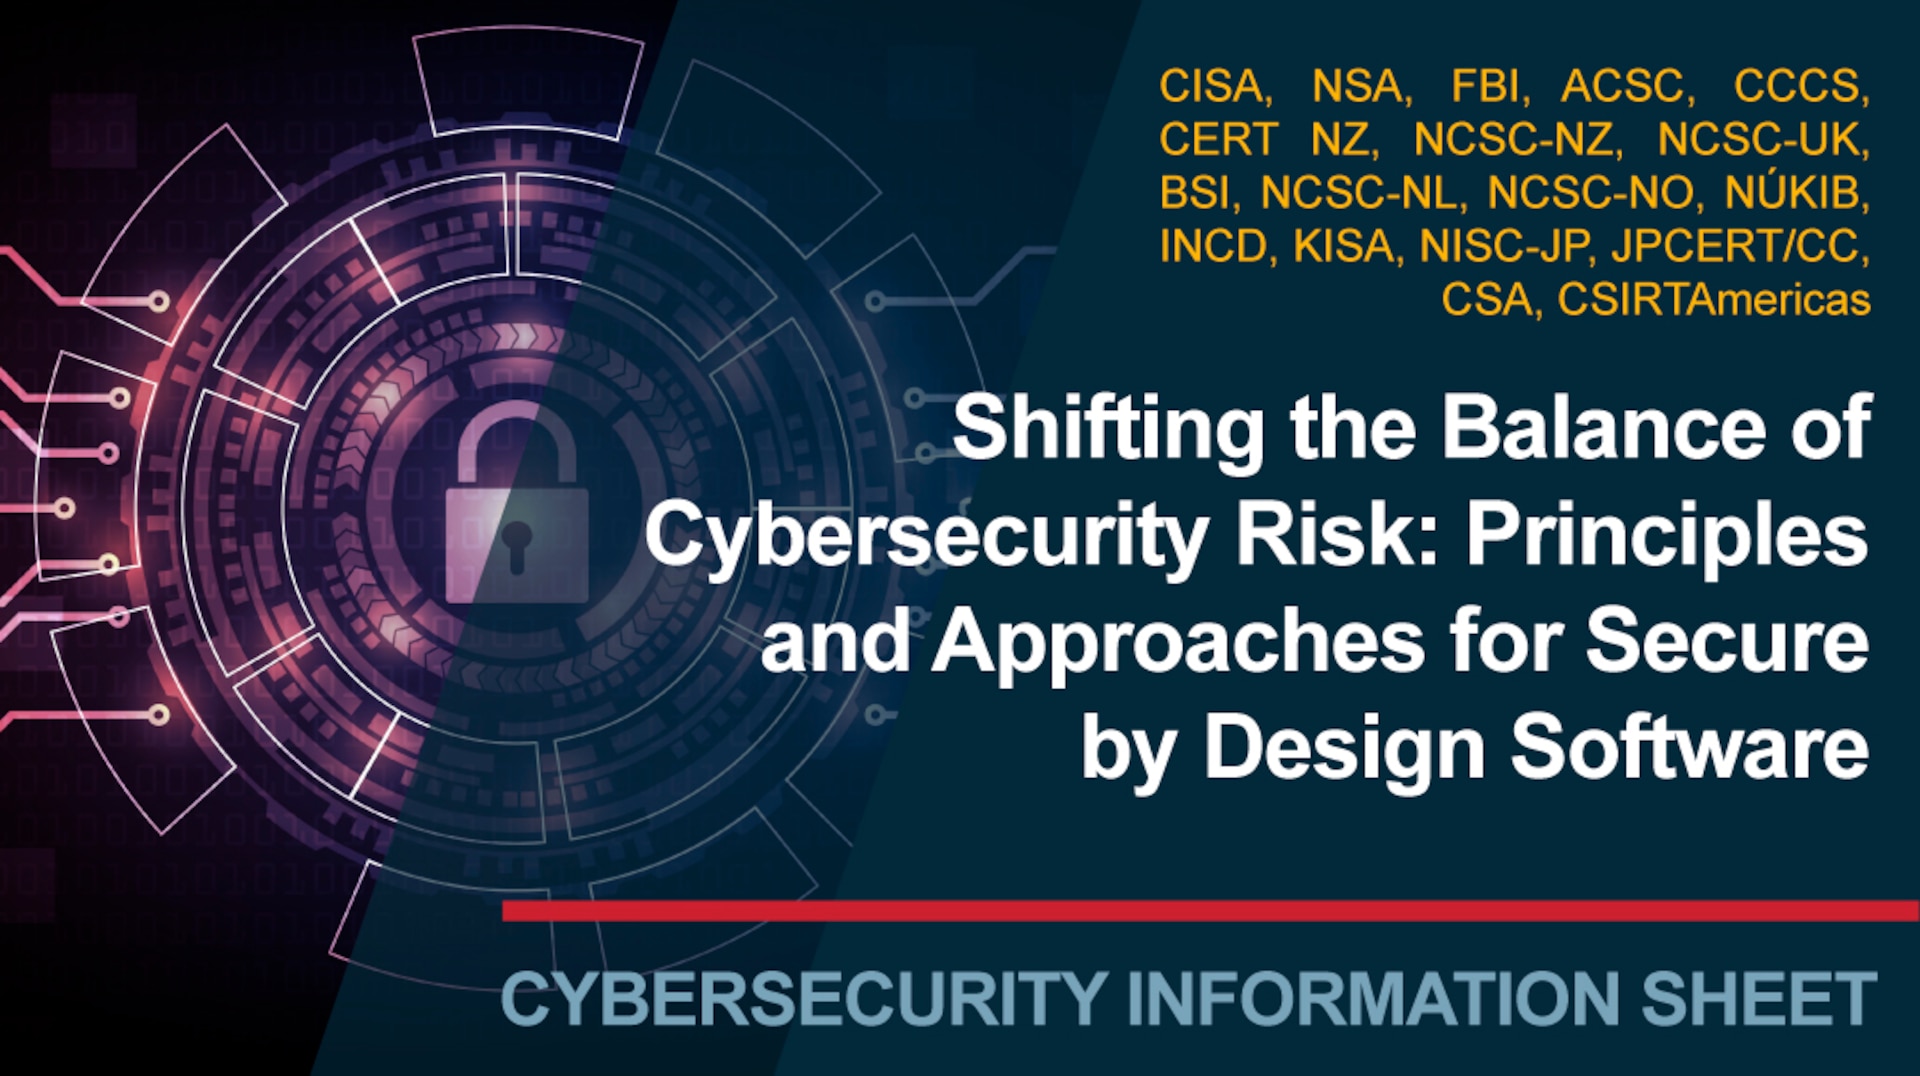 Shifting the Balance of Cybersecurity Risk: Principles and Approaches for Secure by Design Software. Cybersecurity Information Sheet.